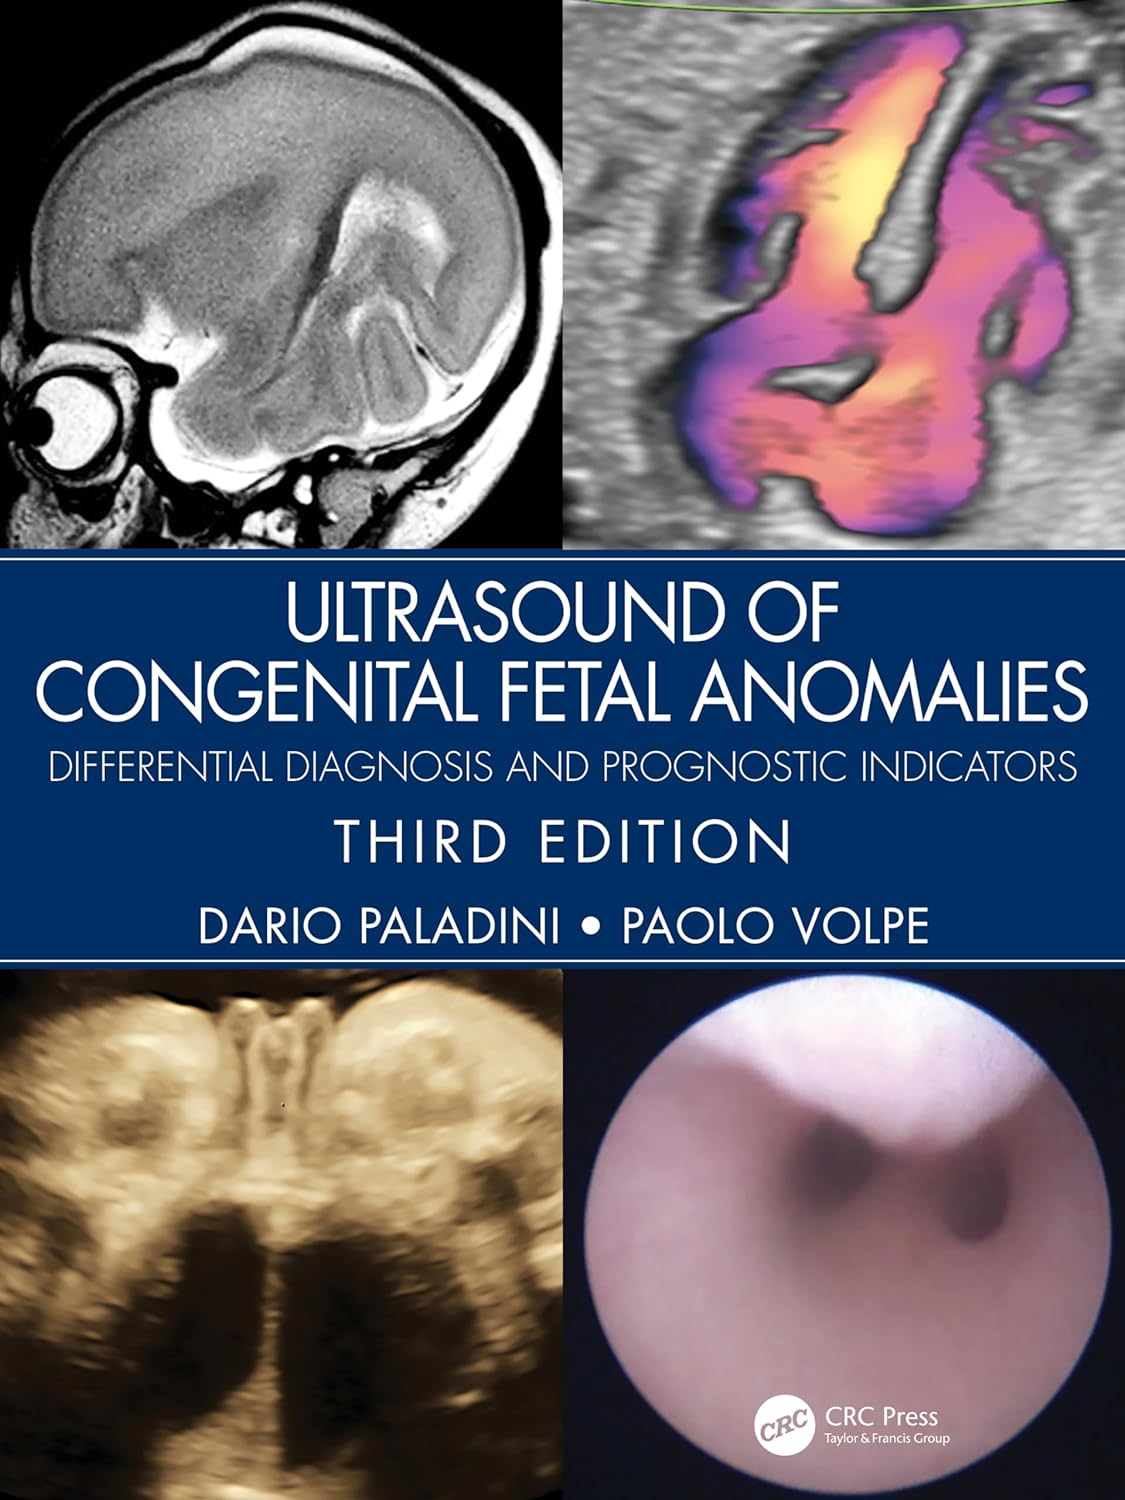 Ultrasound Of Congenital Fetal Anomalies: Differential Diagnosis And Prognostic Indicators, 3rd Edition